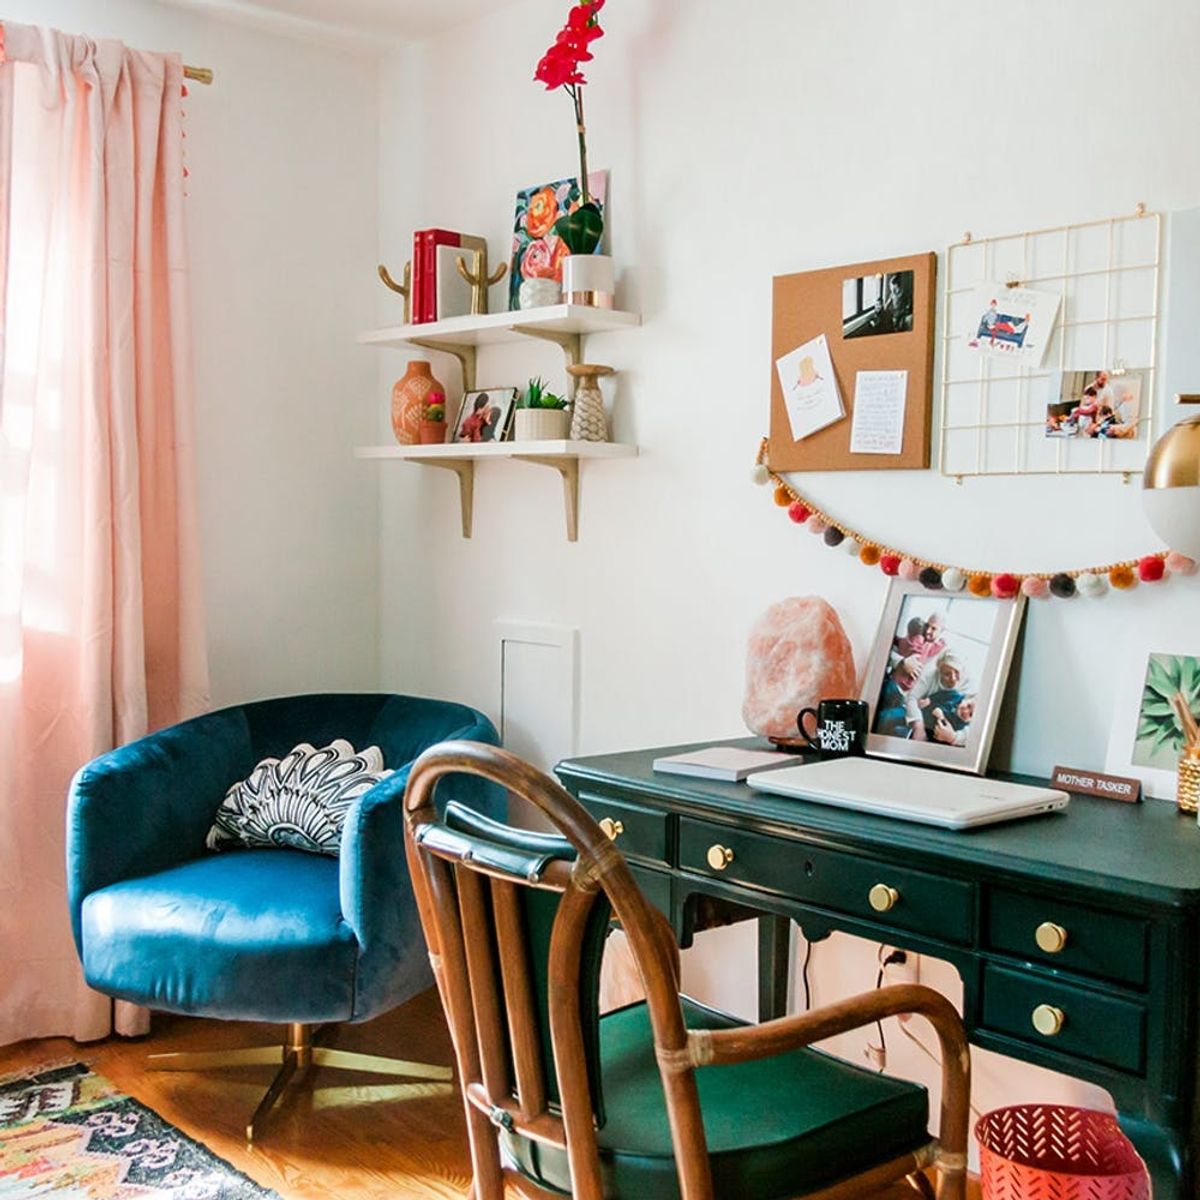 This Tiny-Space Makeover Is Multi-Purpose Room #Goals